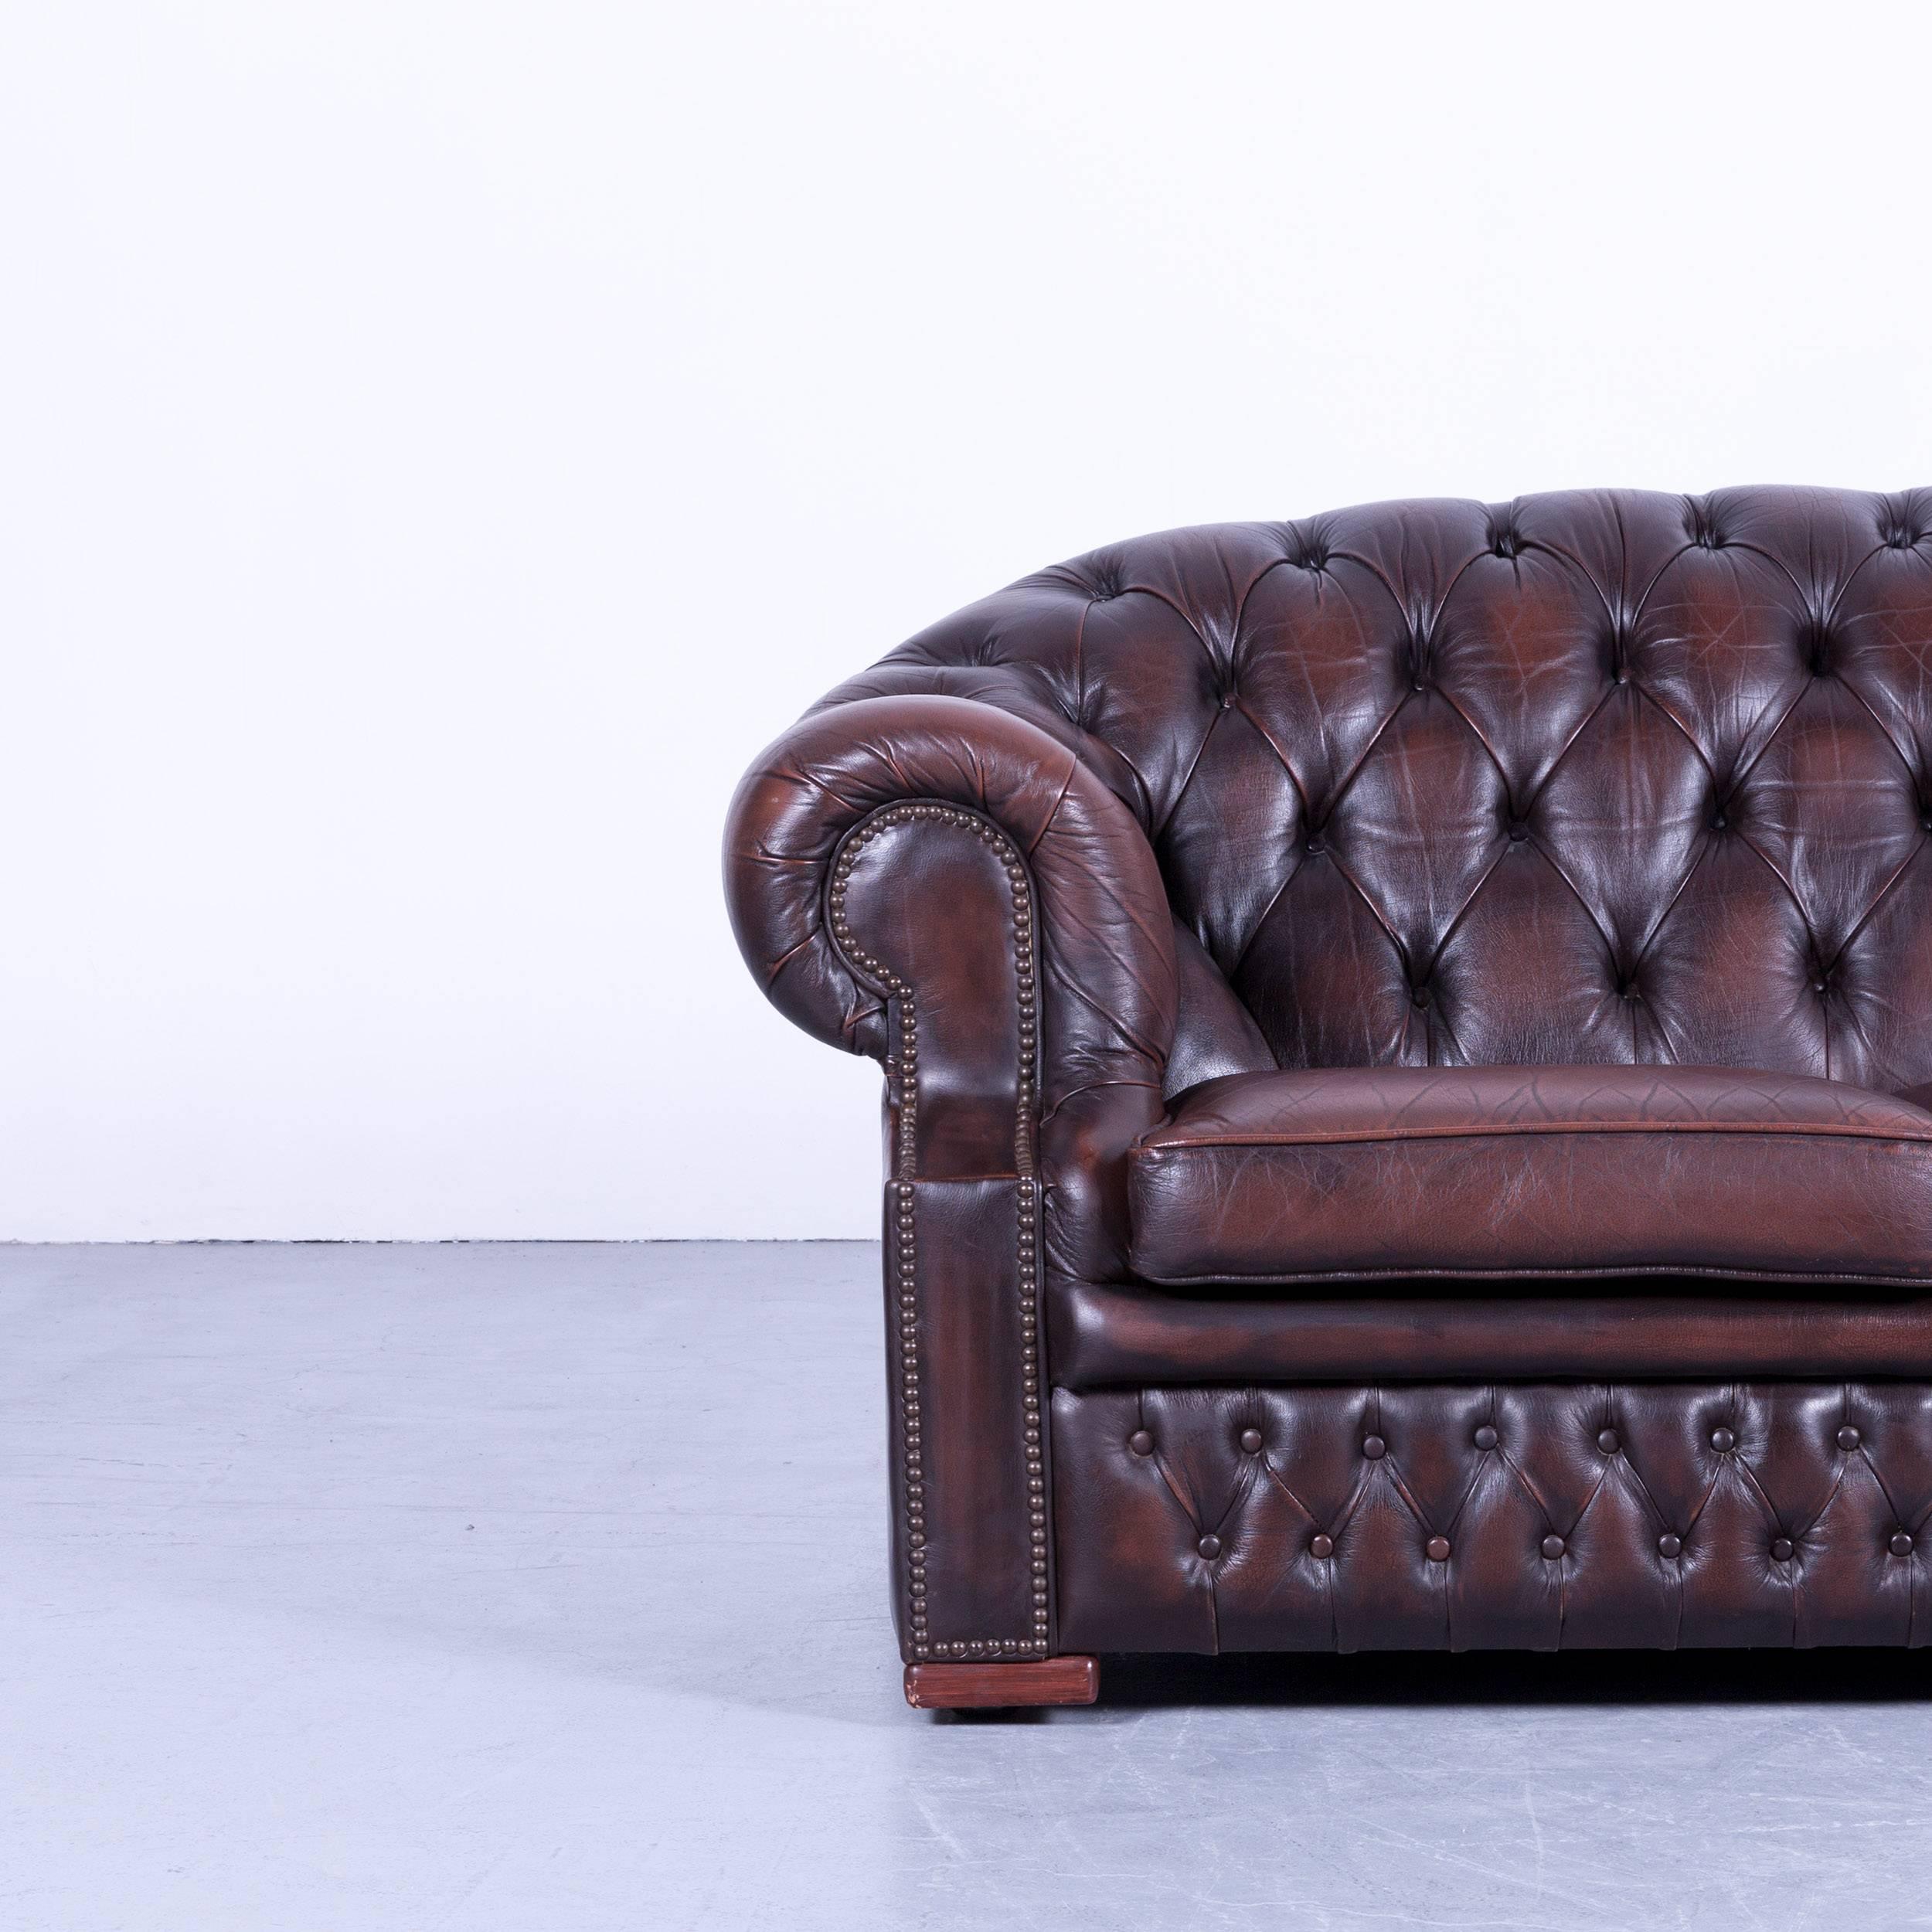 British Centurion Chesterfield Sofa Brown Mocca Two-Seat Vintage Retro Couch